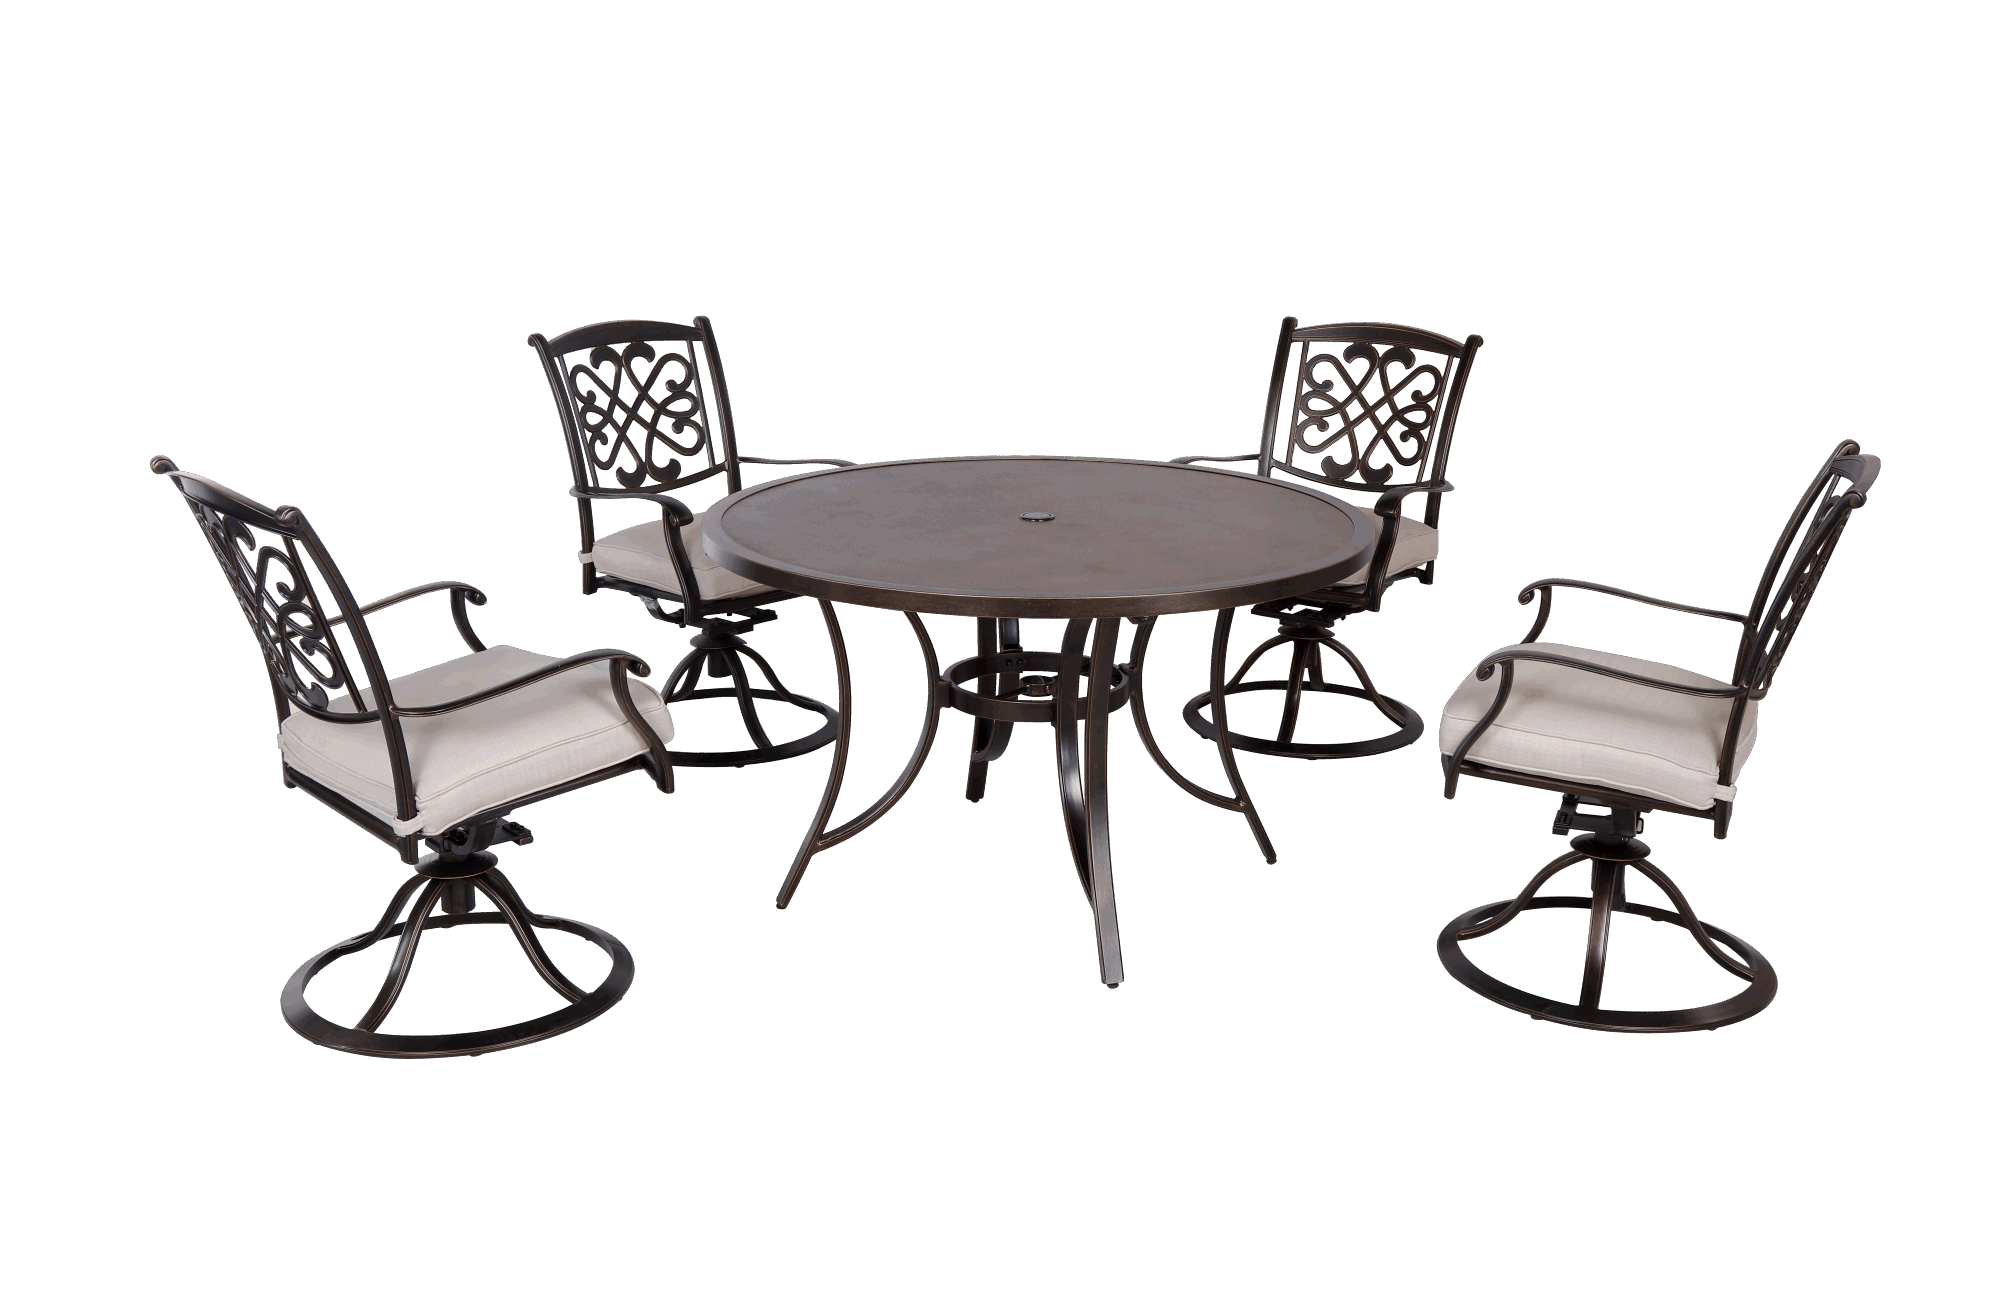 [PICK UP ONLY]Outdoor 5 Piece Dining Set Patio Furniture w/ 4pcs Swivel Chair & 1pc 48inch Tempered Glass Top Table